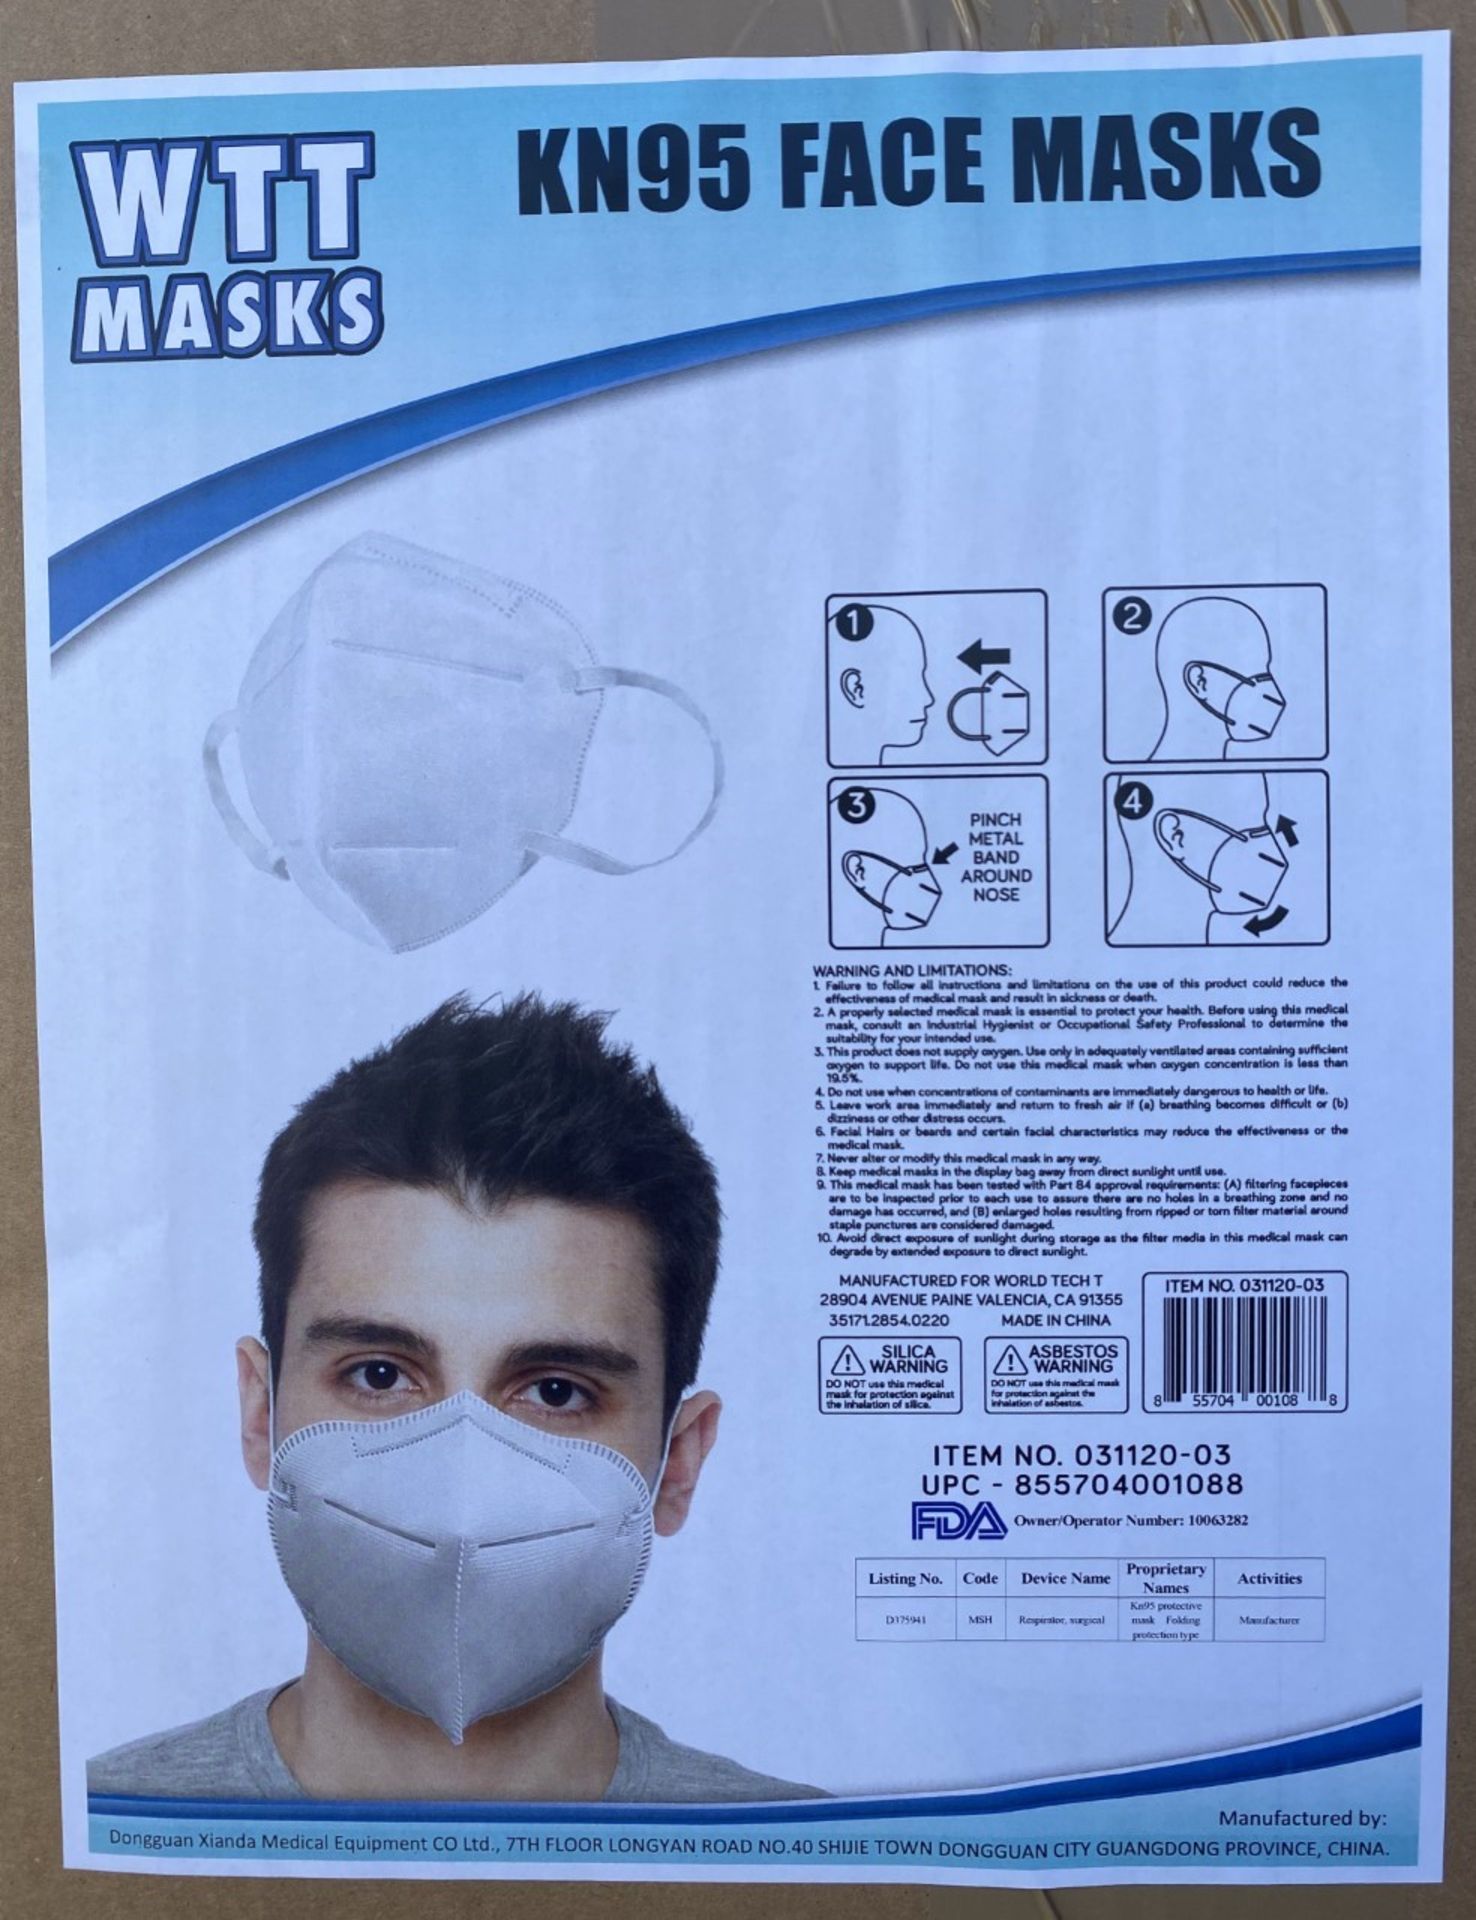 Boxes of KN95 Face Masks (Sold by the Box, Bid Multiplied by 64) Face Masks Marked KN95 But NOT